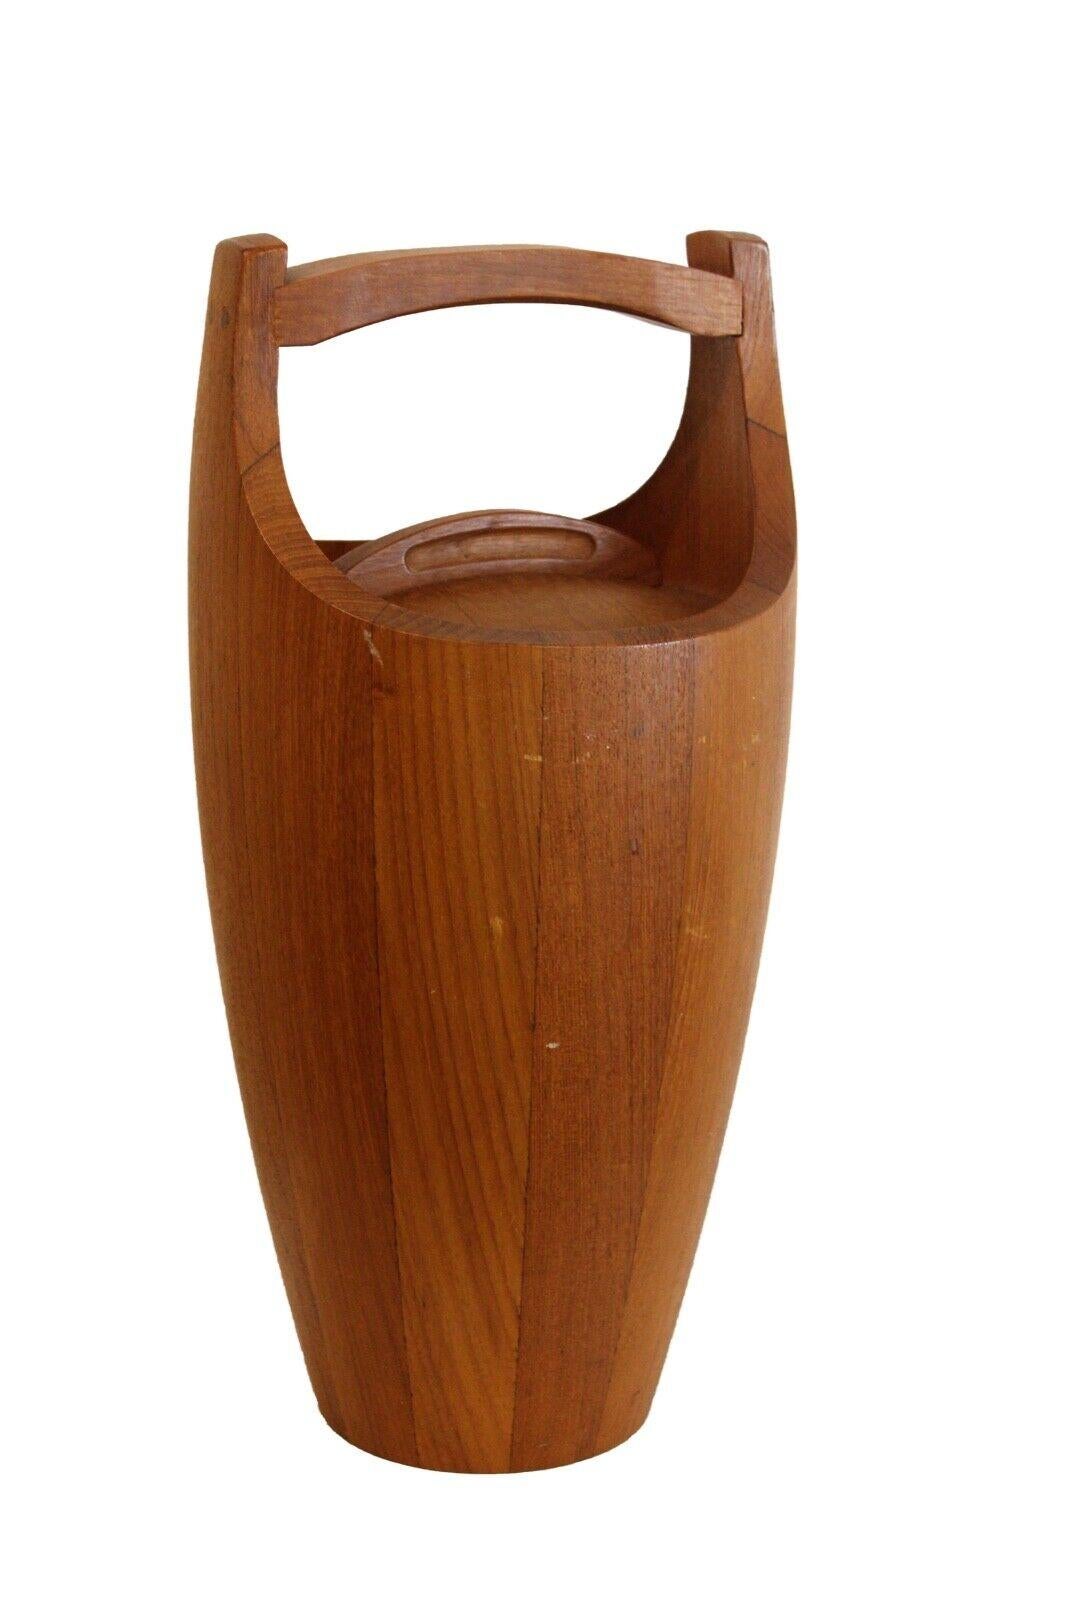 For your consideration is this stunning clean-line Jens Quistgaard for Dansk Danish Teak Ice Bucket. Dimensions: 7